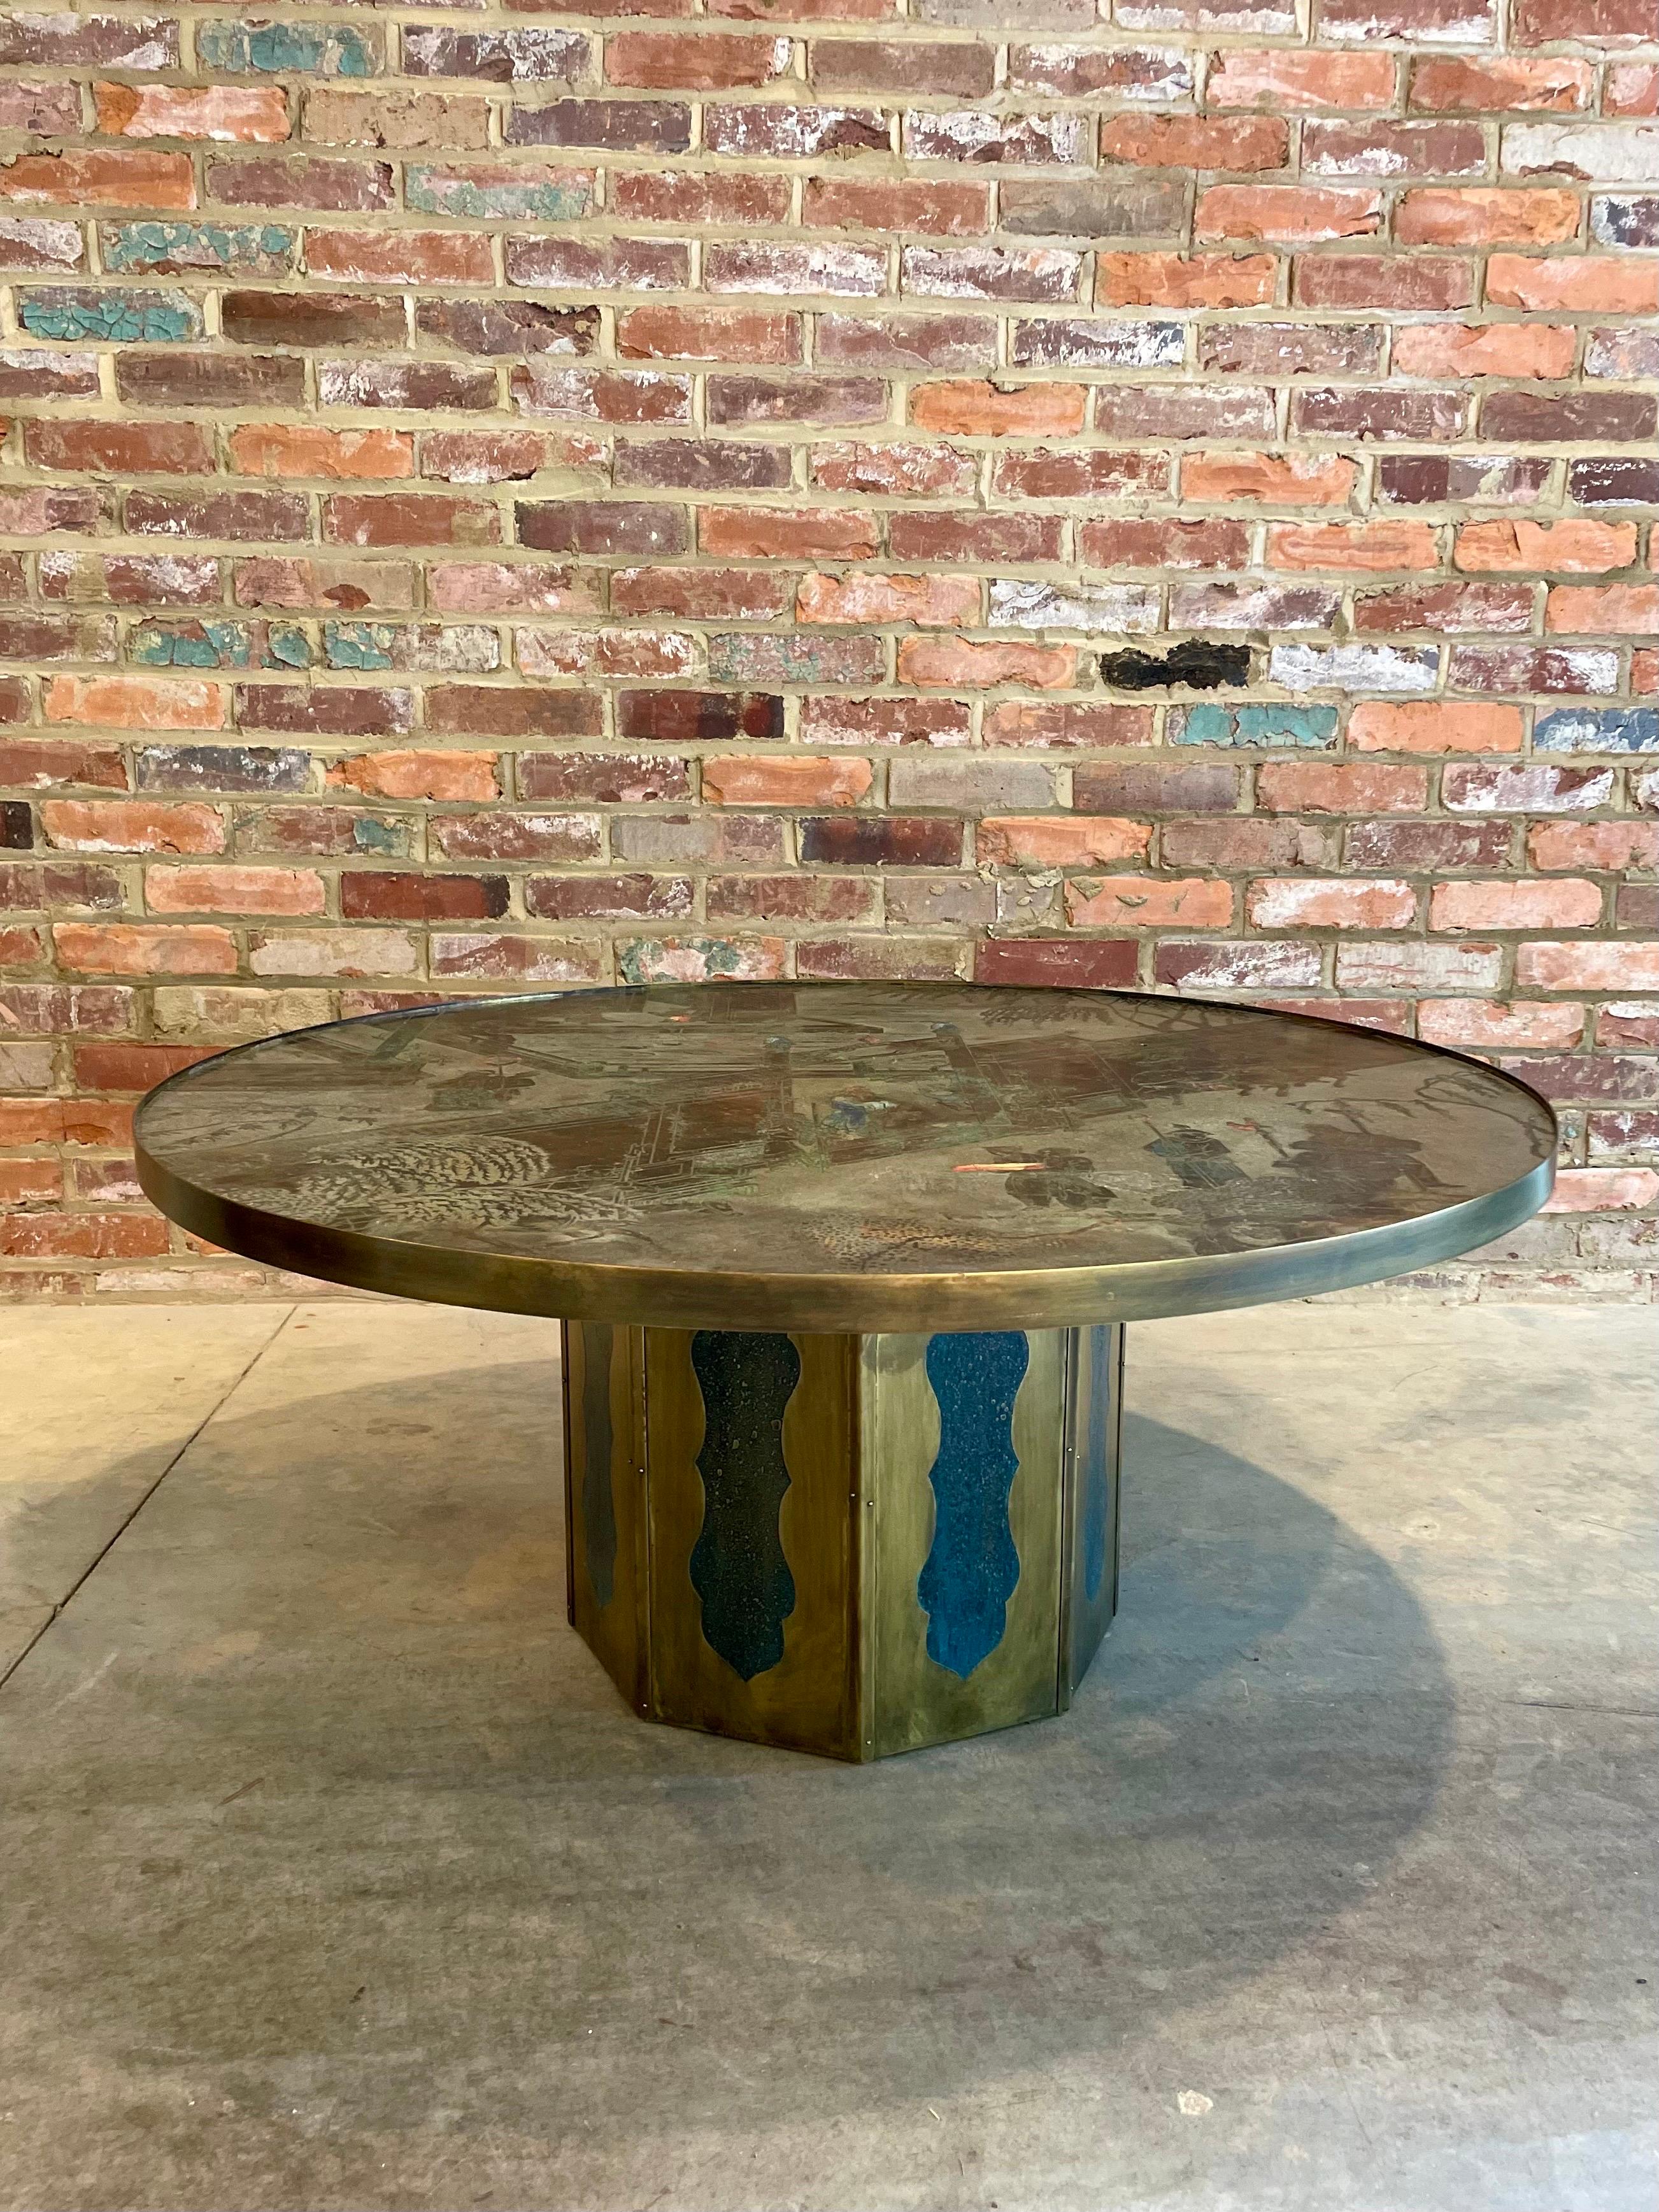 The Laverne Chan cocktail table showcases the ingenuity and creativity of father and son duo, Philip and Kelvin LaVerne. The table features a chinoiserie motif that is acid-etched into a bronze and pewter surface, giving it a unique and intricate